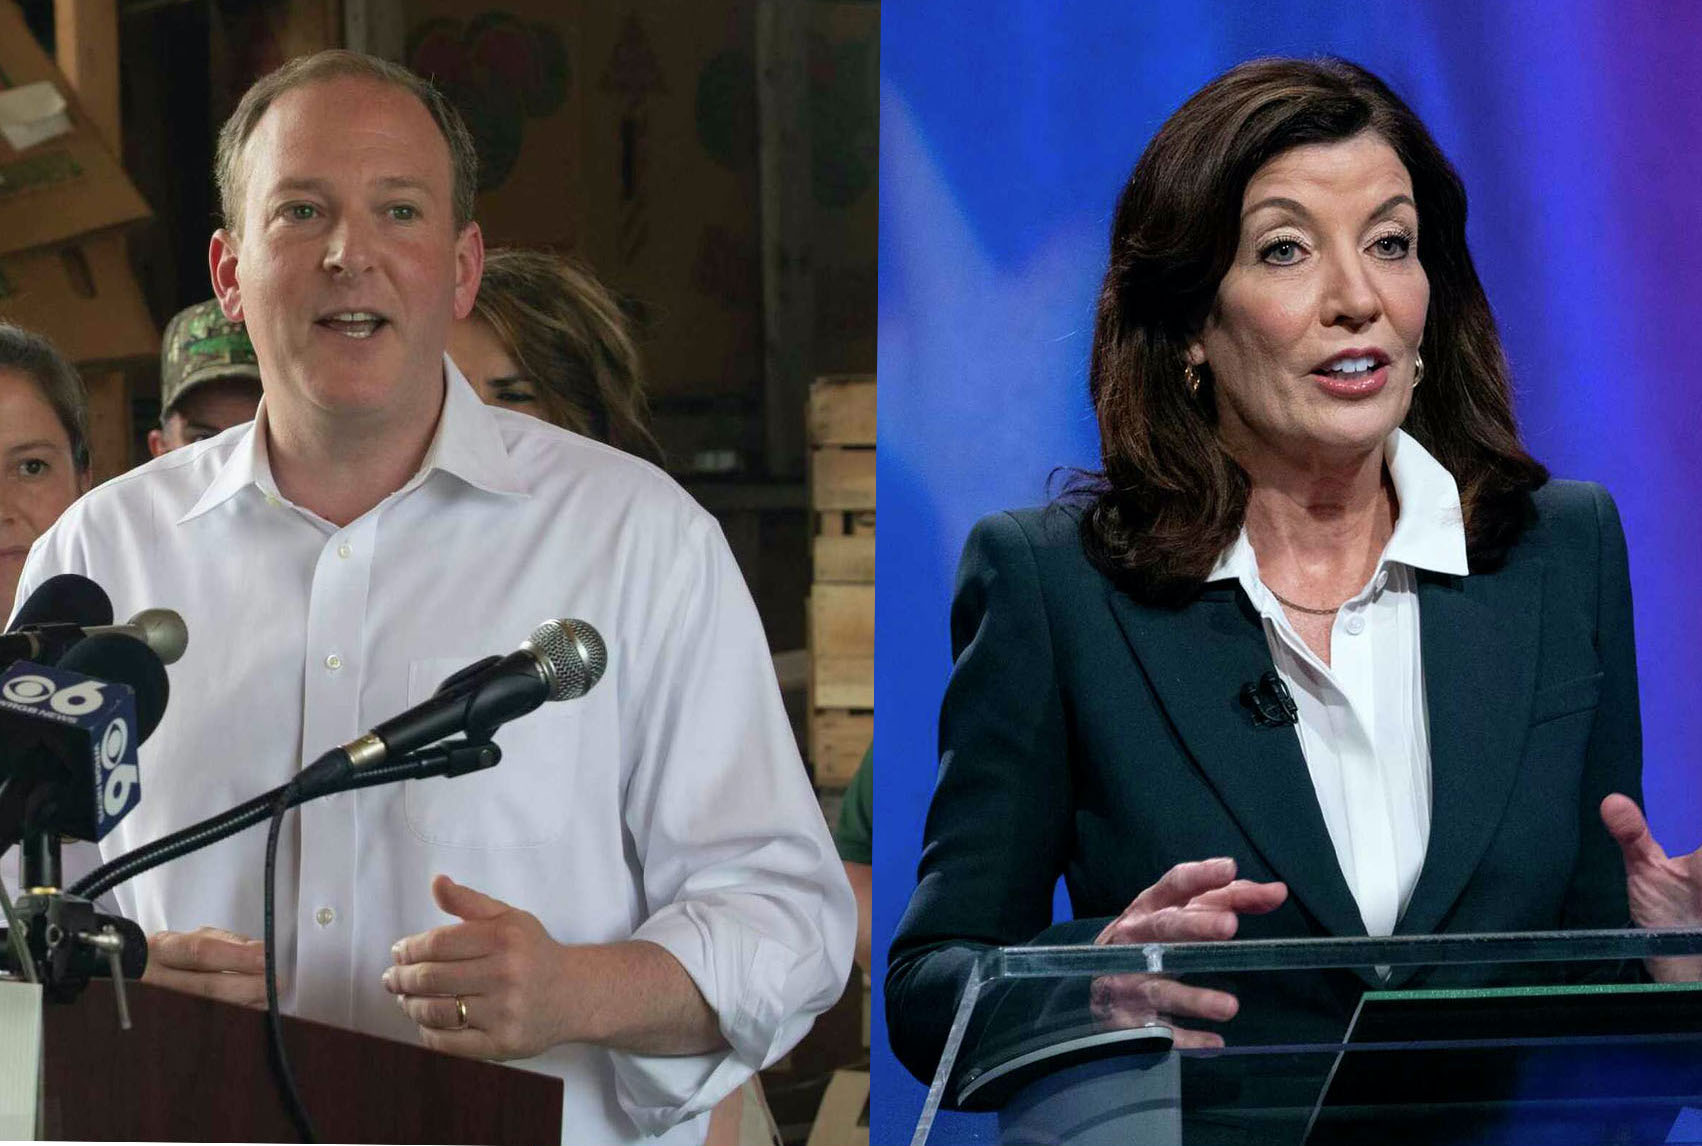 Zeldin and Hochul to take part in televised debate Tuesday